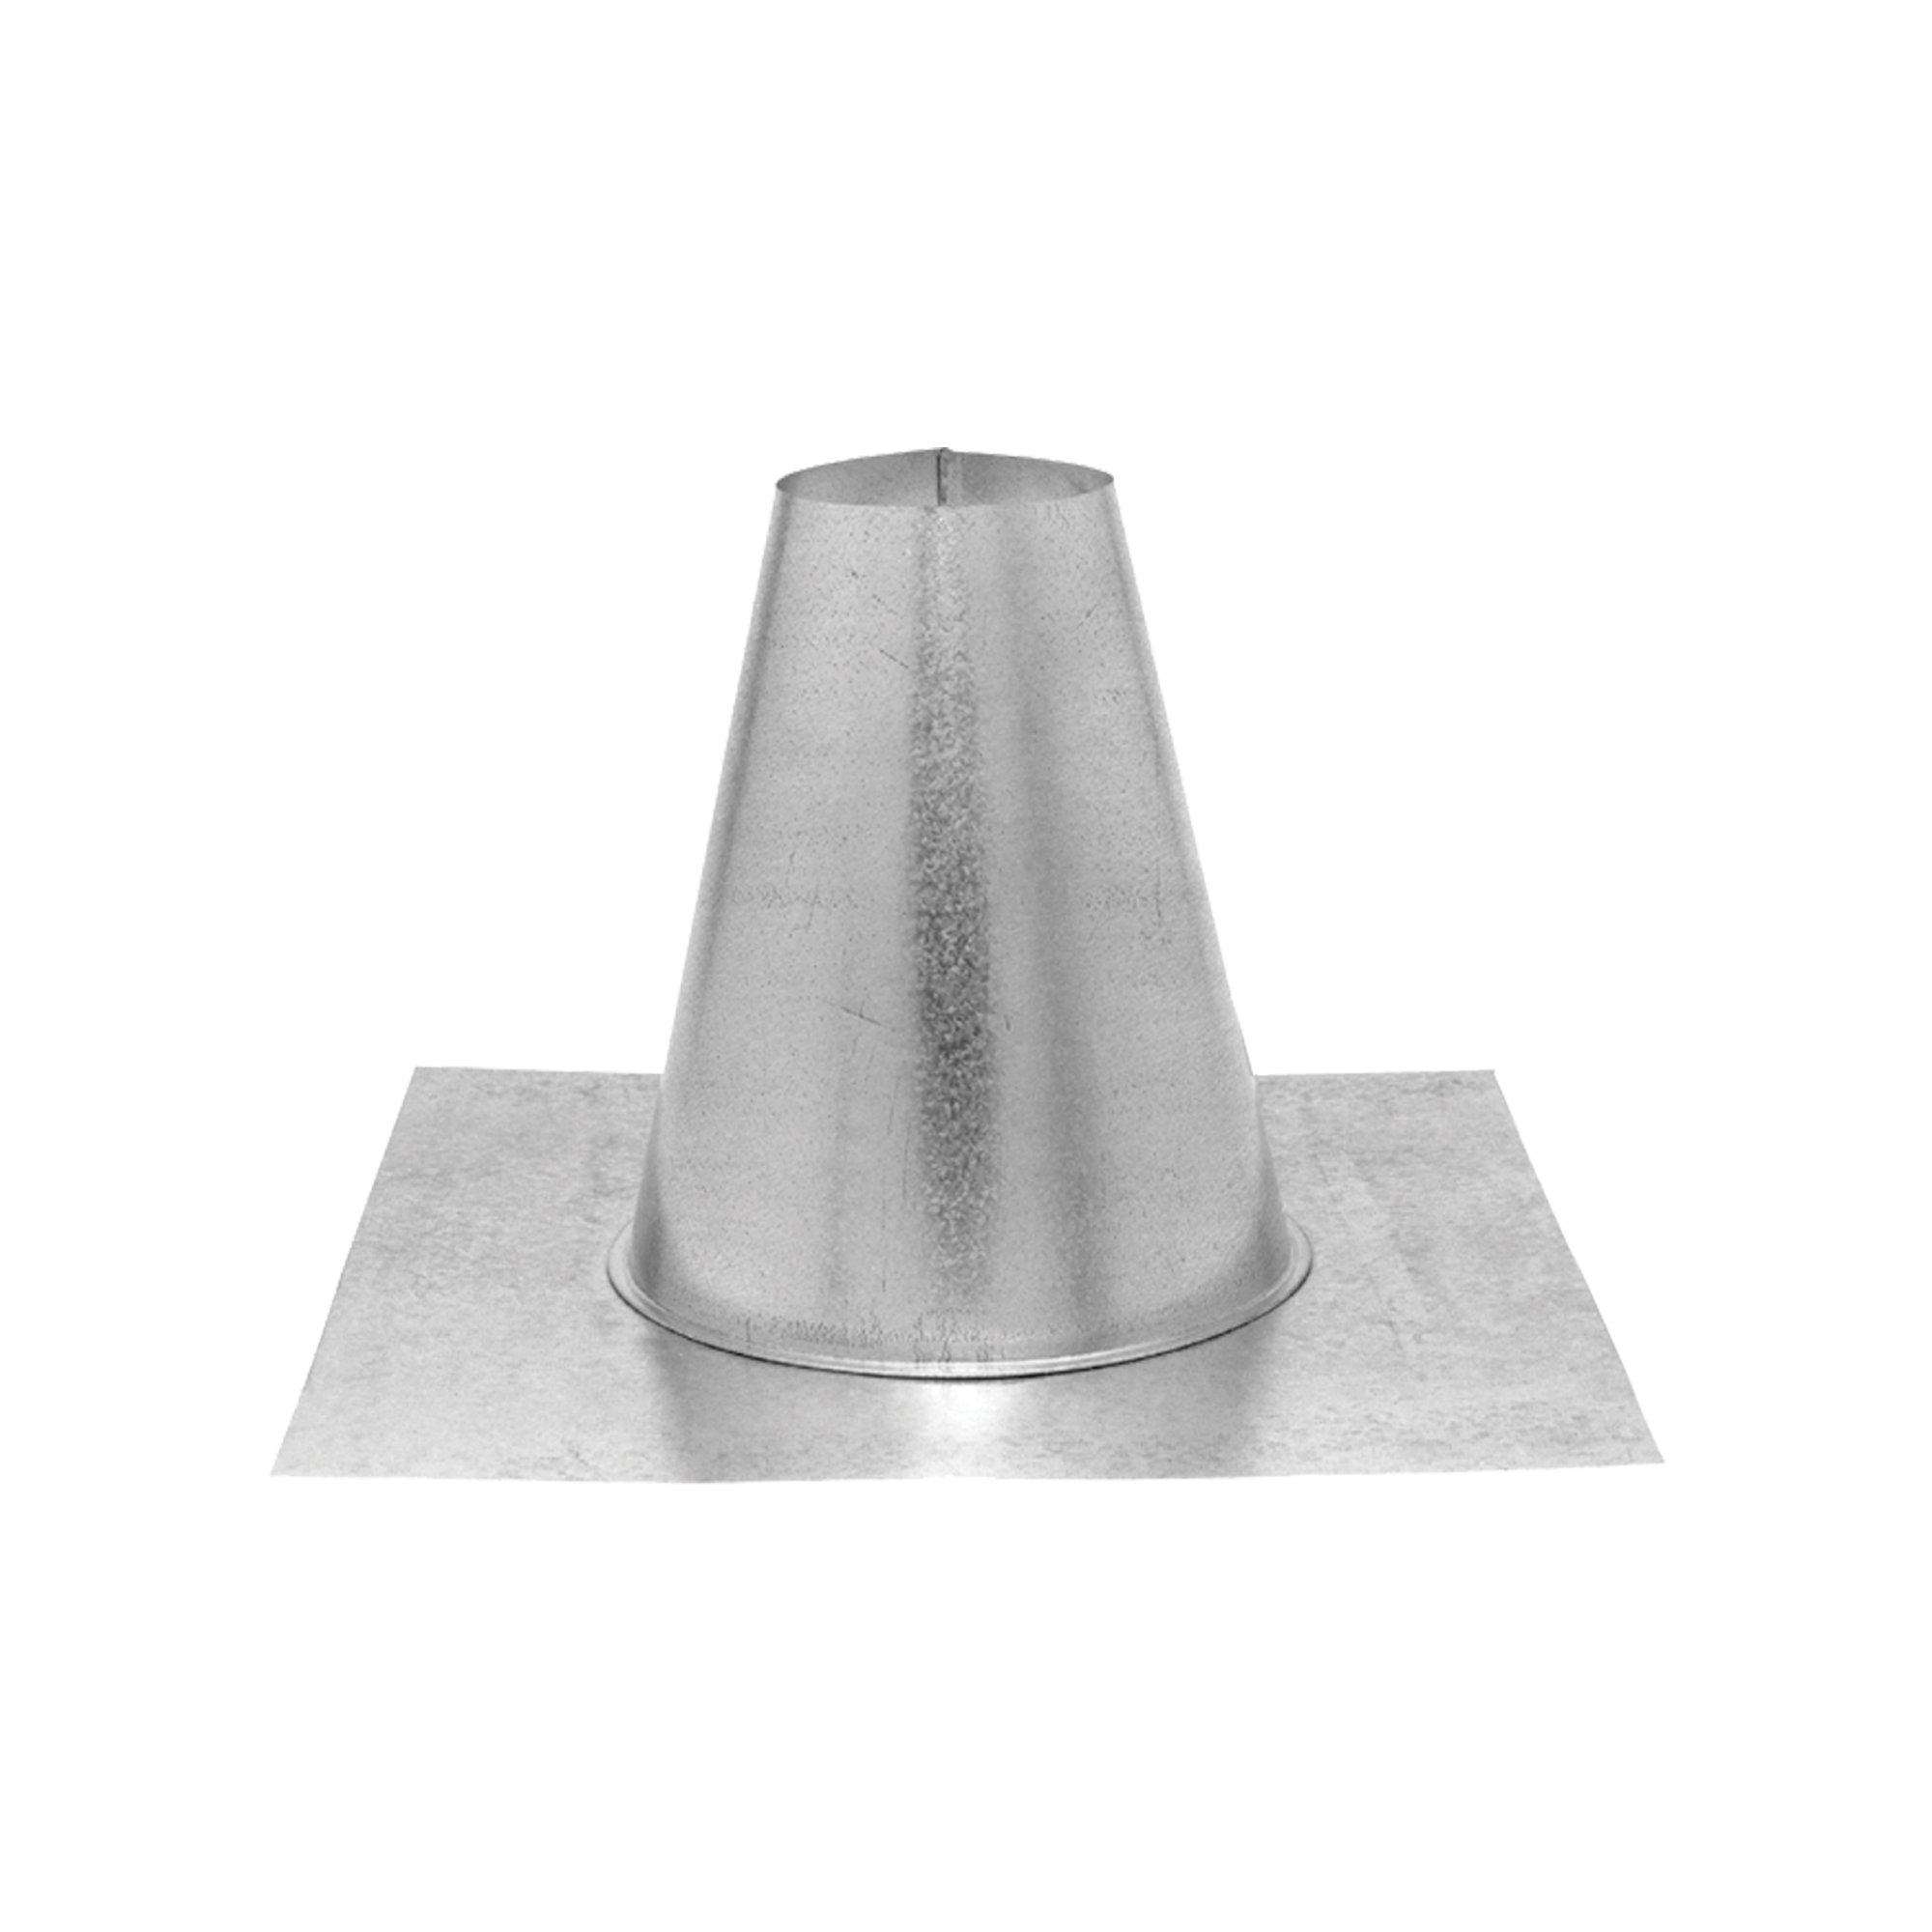 DuraVent, 3Inch Diameter Roof Flashing Tall Cone, Included (qty.) 6 Material Galvanized Steel, Model 3PVL-FF